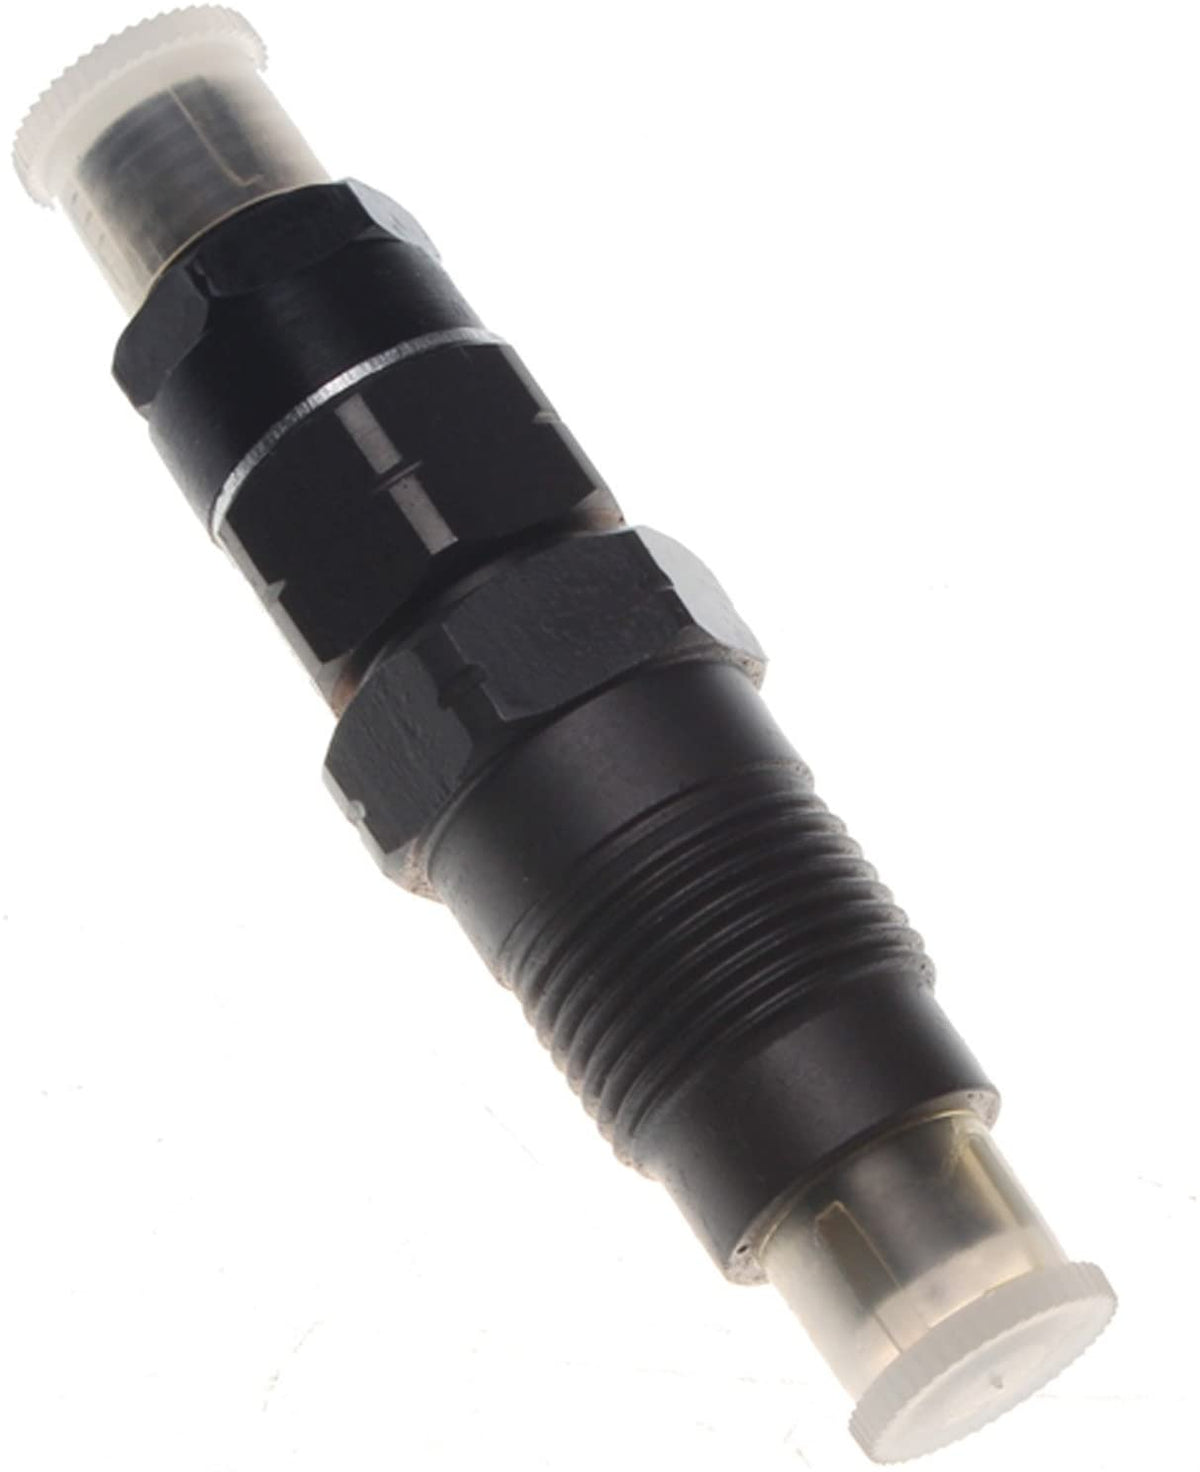 Fuel Injector for Ford New Holland 1320 1520 1530 1620 1630 1715 1720 Ls170 - KUDUPARTS